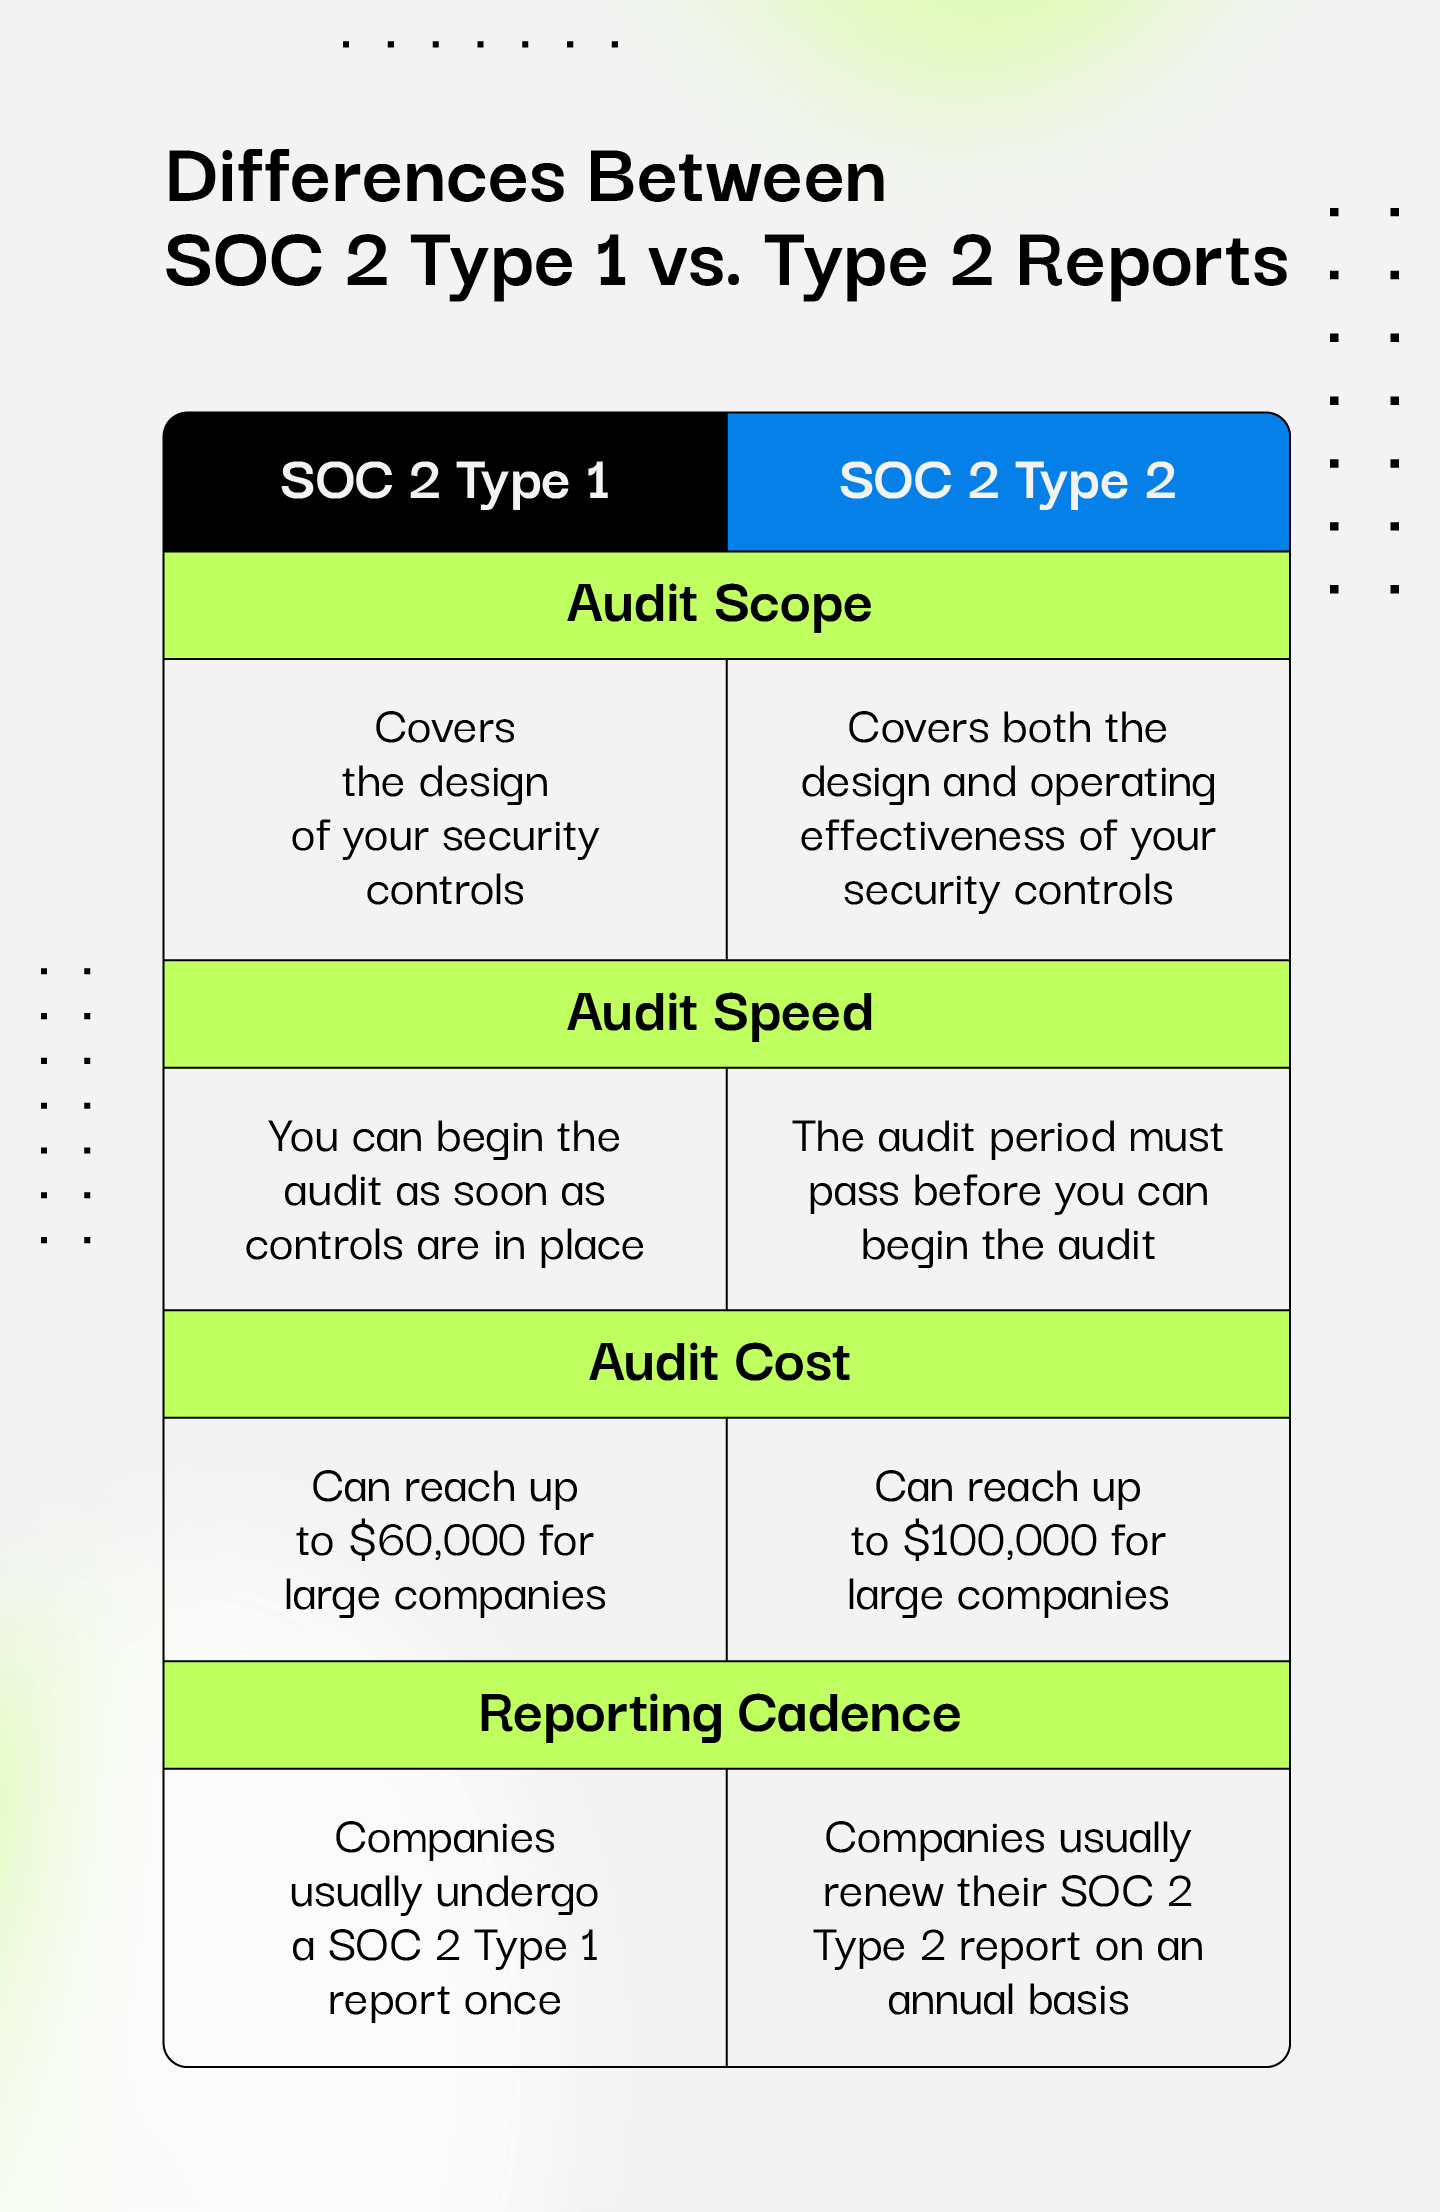 Differences between SOC 2 Type 1 and SOC 2 Type 2 reports 